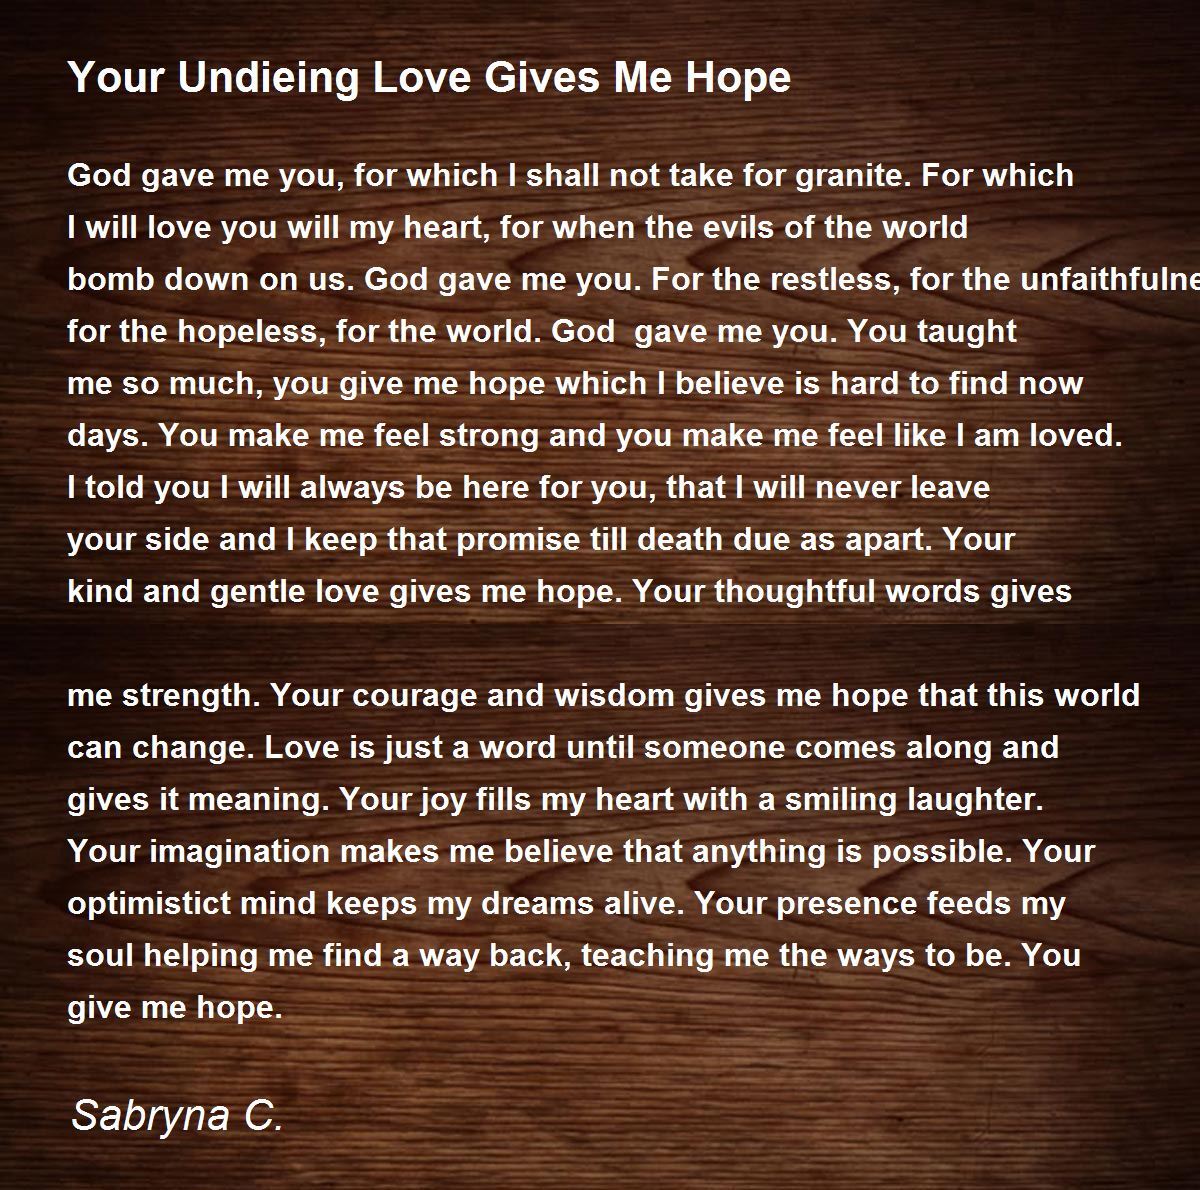 Your love gives me hope